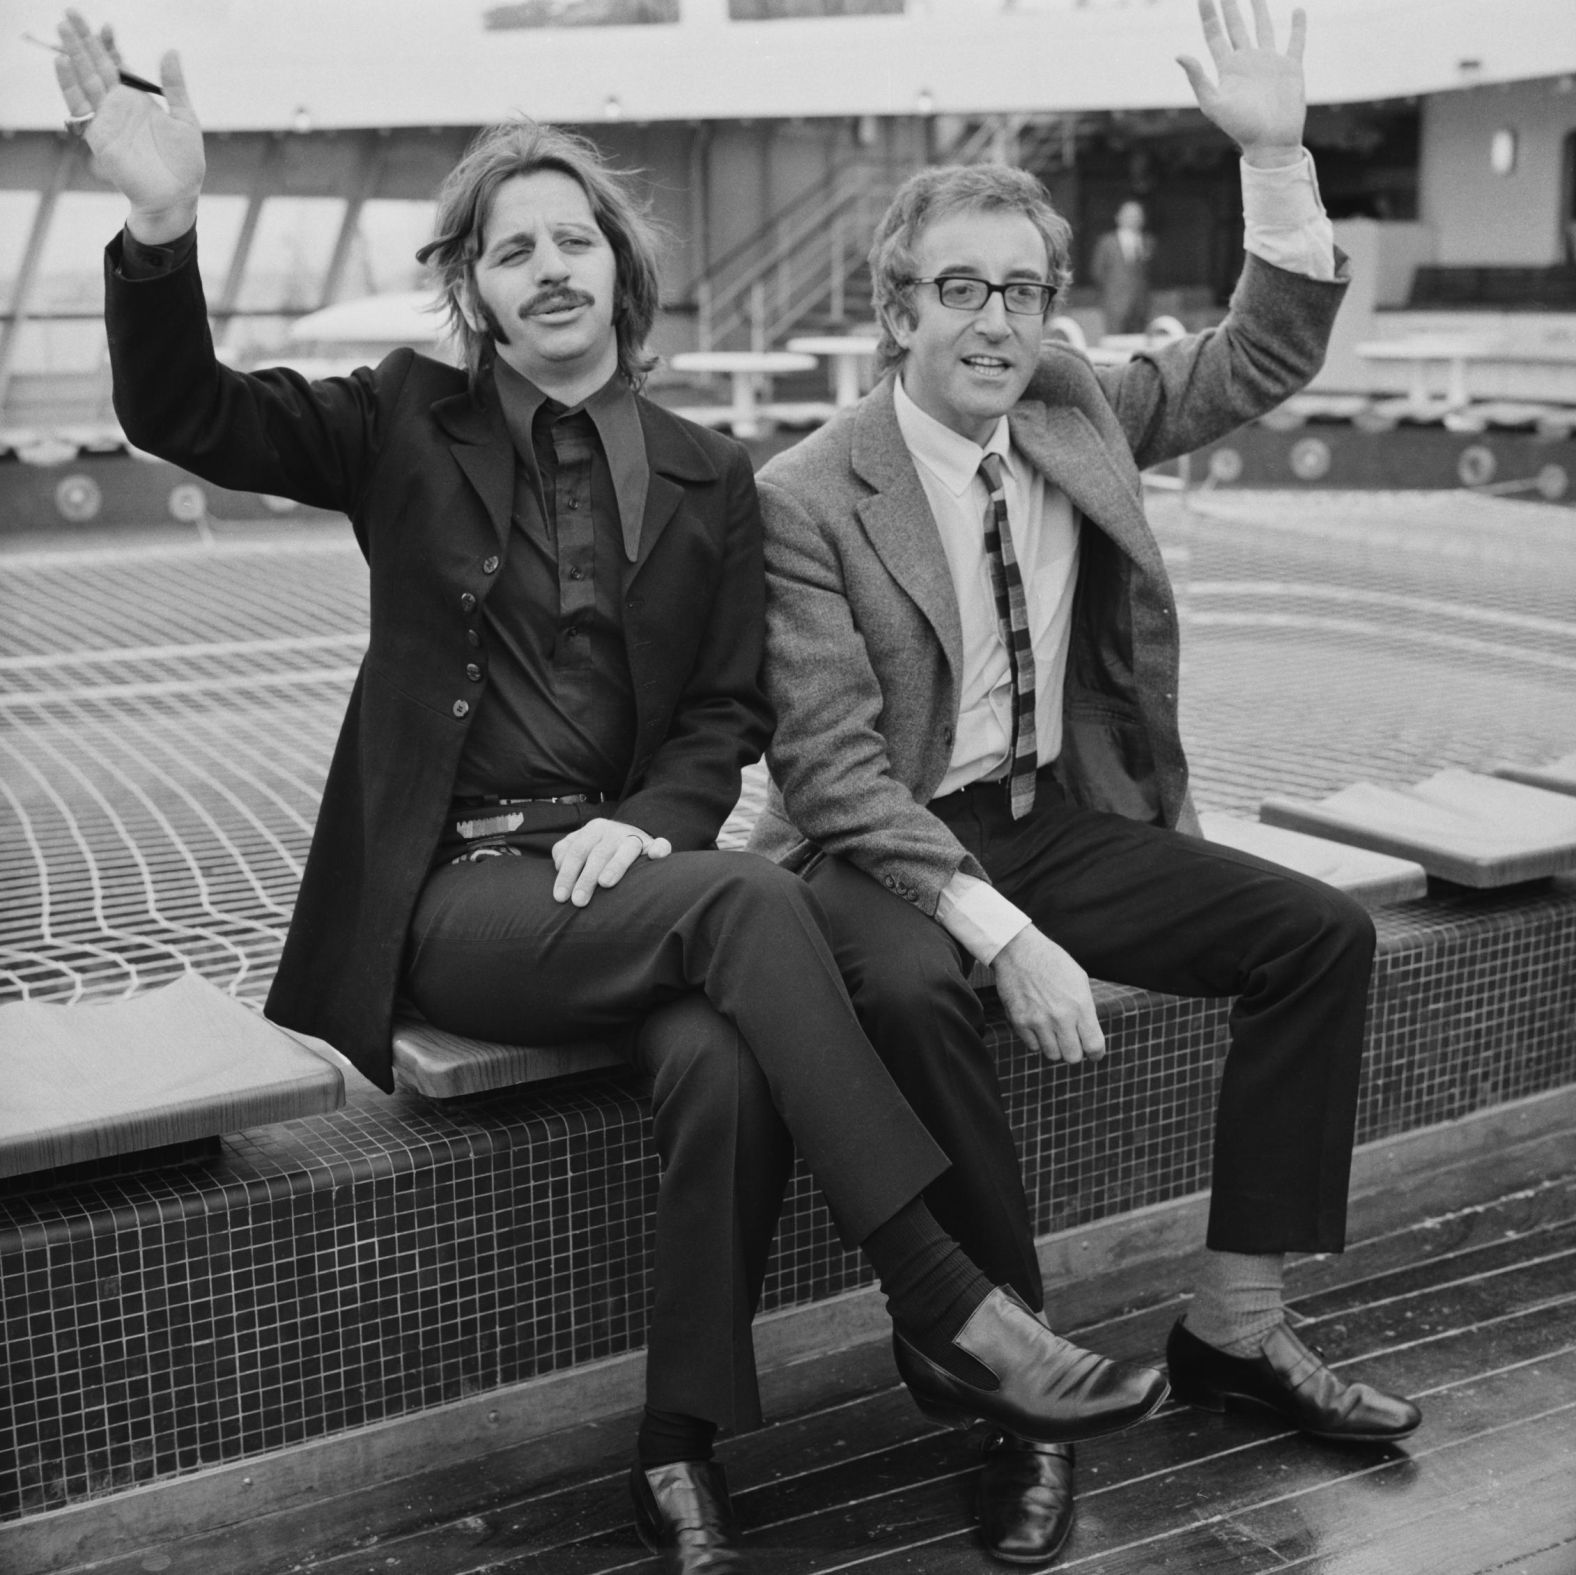 Starr and film actor Peter Sellers wave from a cruise ship before sailing for America in 1969. The two starred in the 1969 film "The Magic Christian."